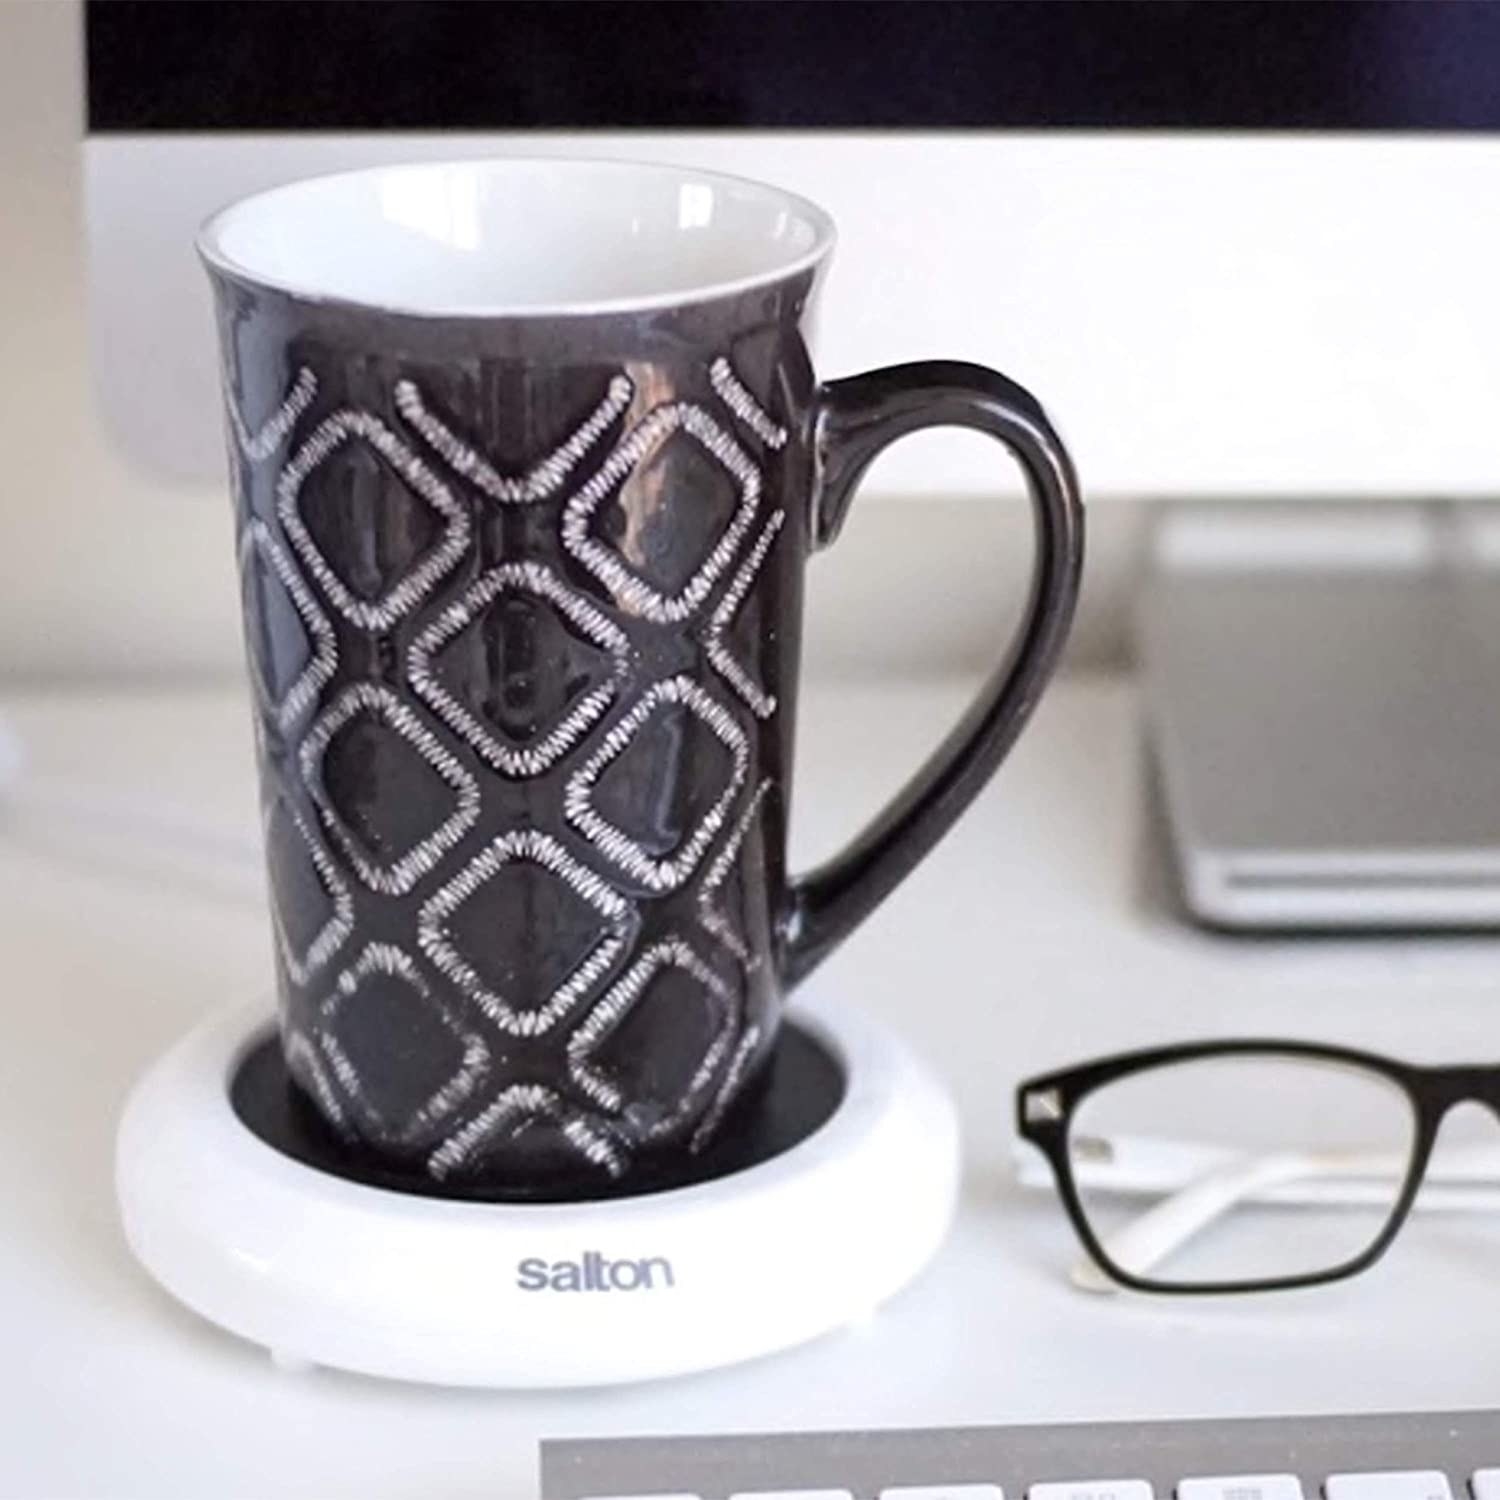 a mug on the warmer next to a computer and glasses